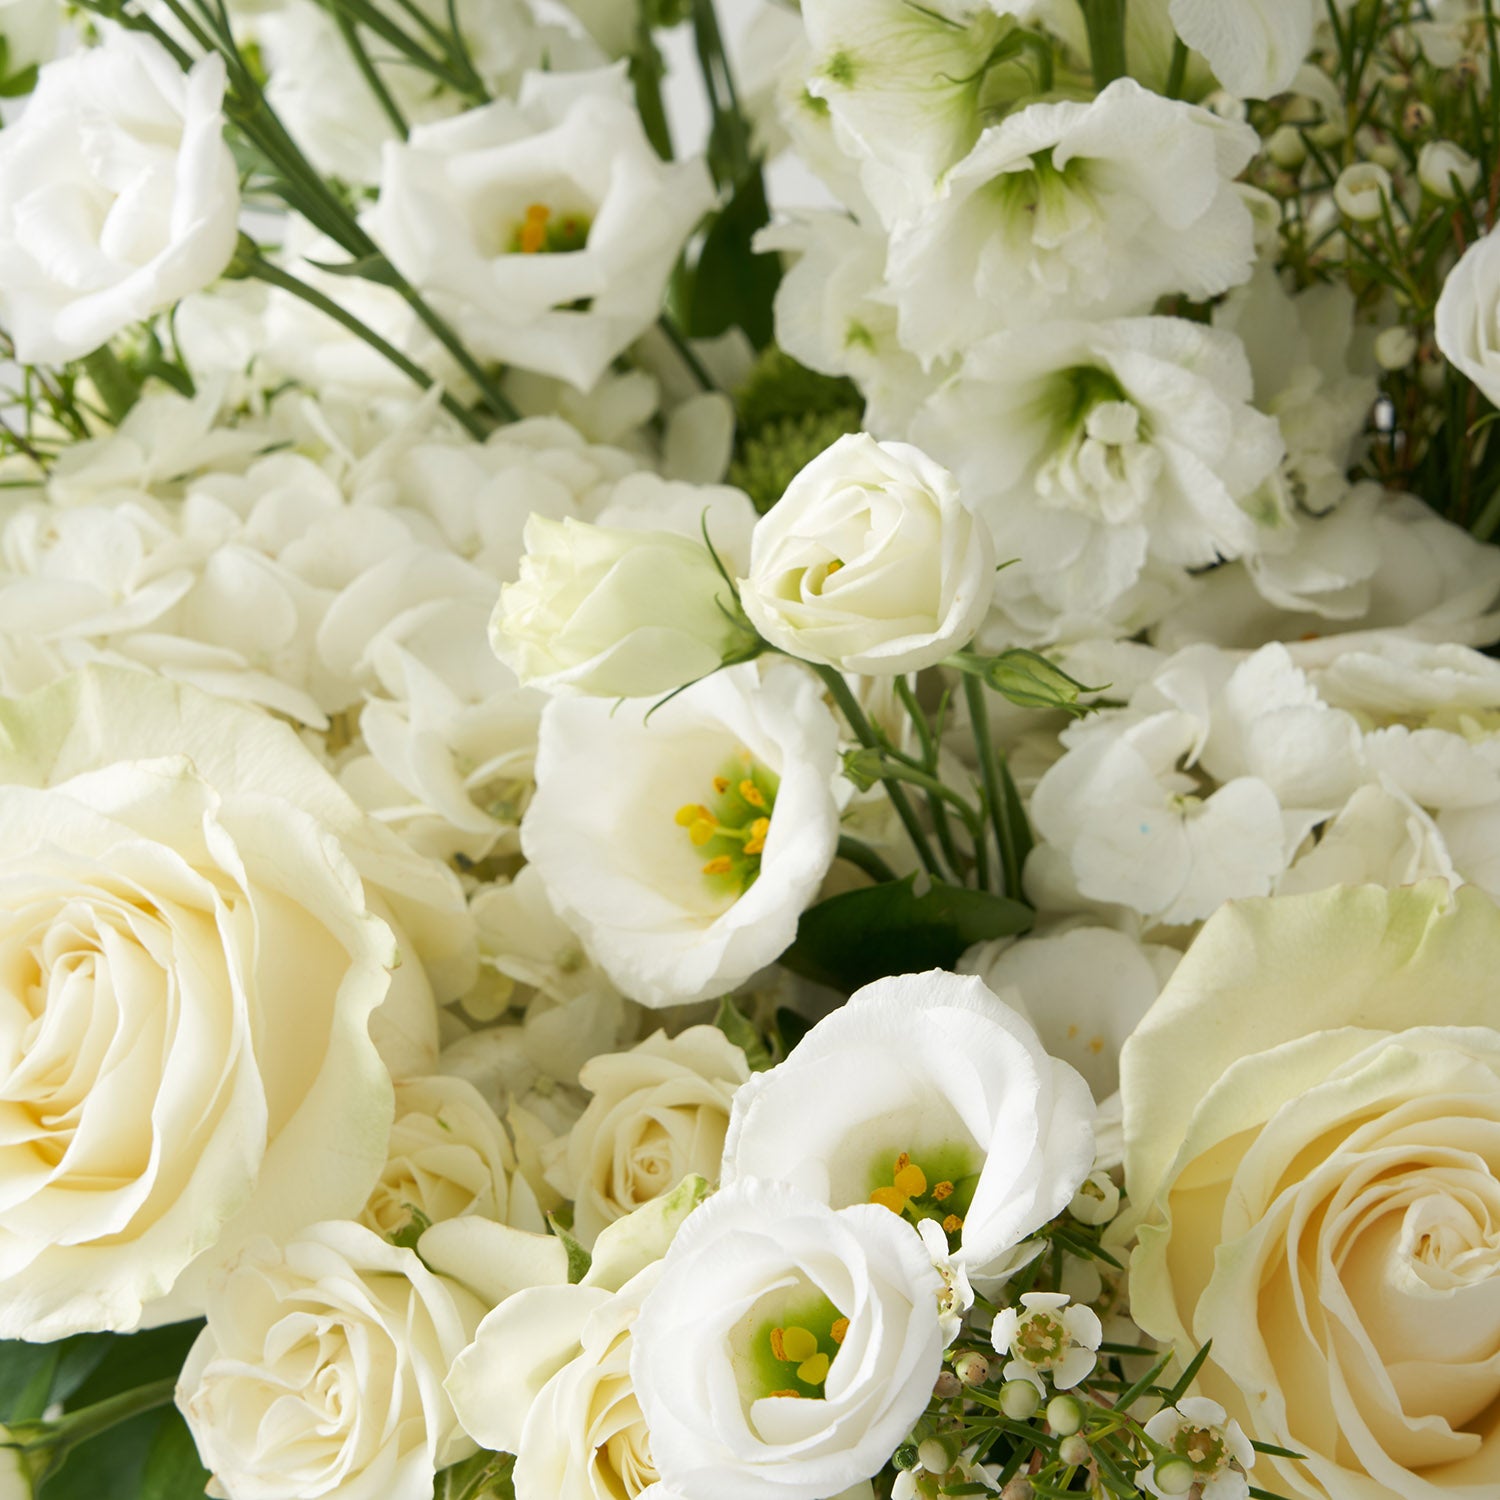 Closeup of white flowers including roses, lisianthus, and hydangea.